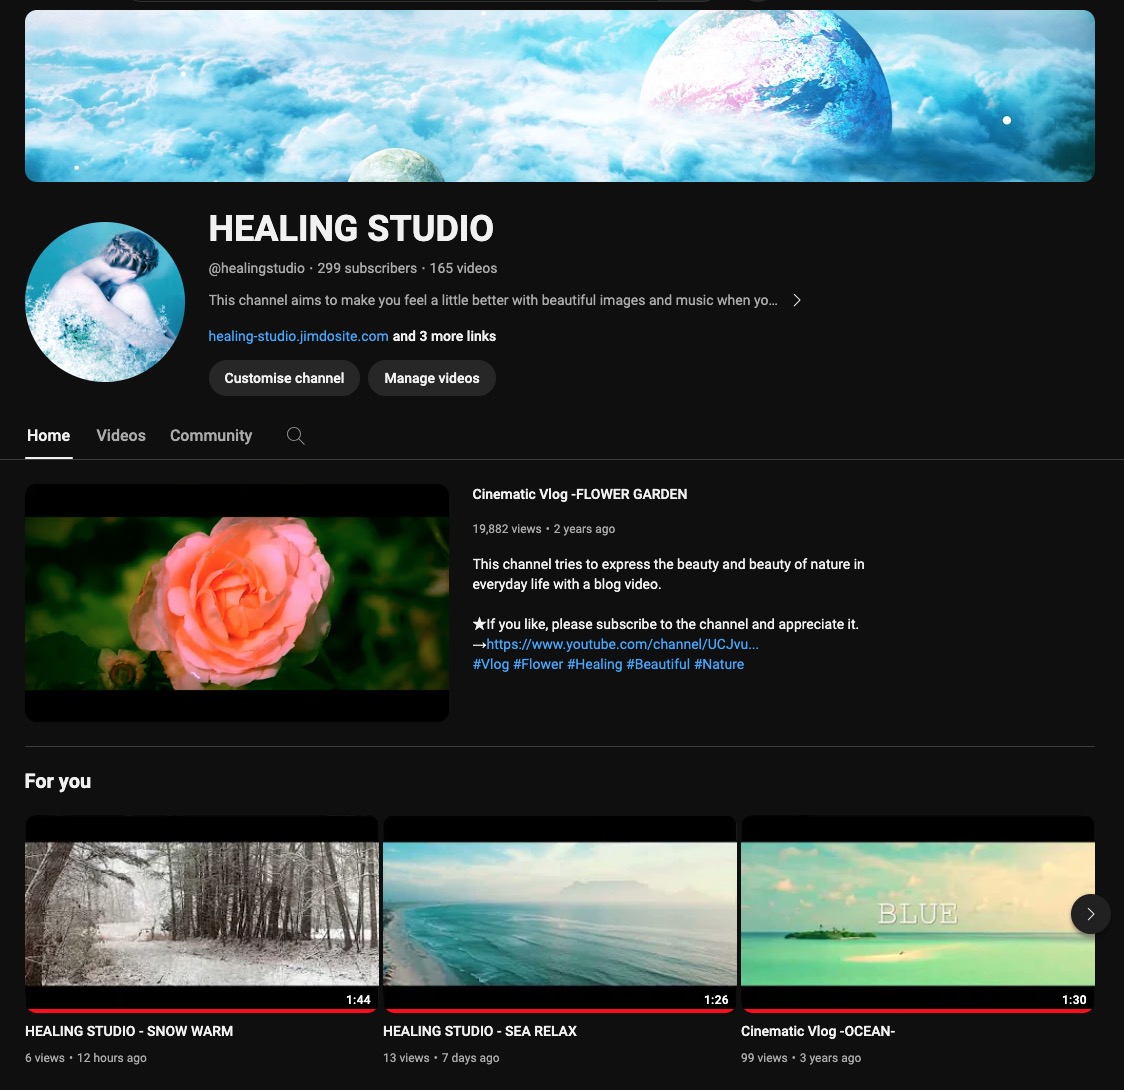 The images of HEALING STUDIO and YouTube channel have been changed. youtube.com/@healingstudio